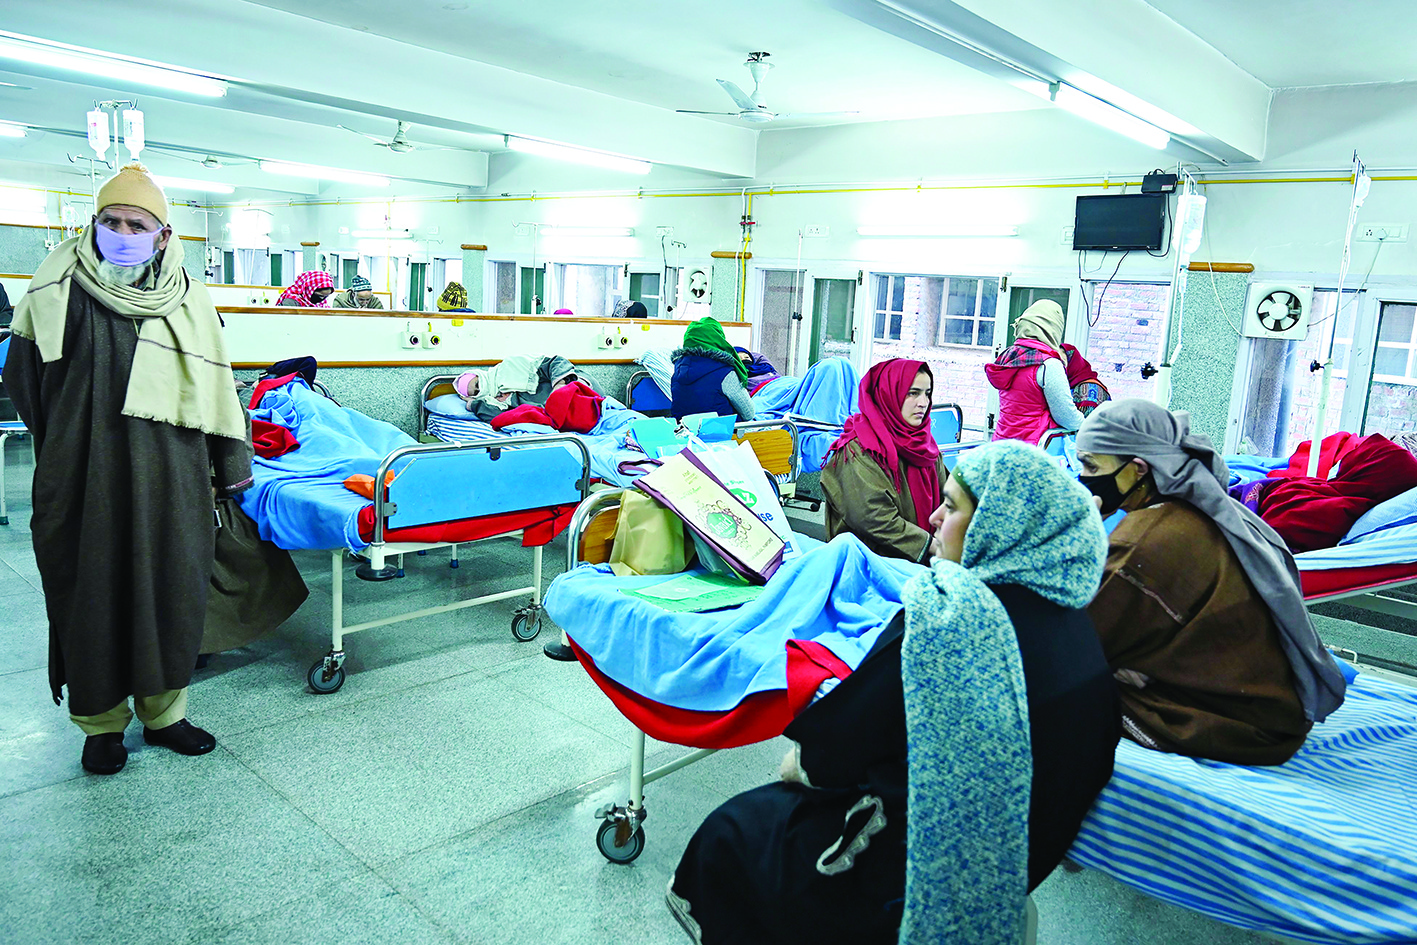 In this picture taken on February 7, 2020, cancer patients rest inside a hospital ward in Srinagar. - In August, India's Hindu-nationalist government stripped the Himalayan region of its semi-autonomous status and imposed restrictions on movement and a communications blackout, virtually cutting it off from the outside world. Life for Kashmir's seven-million inhabitants came to a standstill, including for doctors and patients who rely heavily on the internet to consult specialists outside the region, communicate with patients and order vital medicine. (Photo by Tauseef MUSTAFA / AFP) / TO GO WITH India-Kashmir-unrest-politics-health,FOCUS by Parvaiz Bukhari